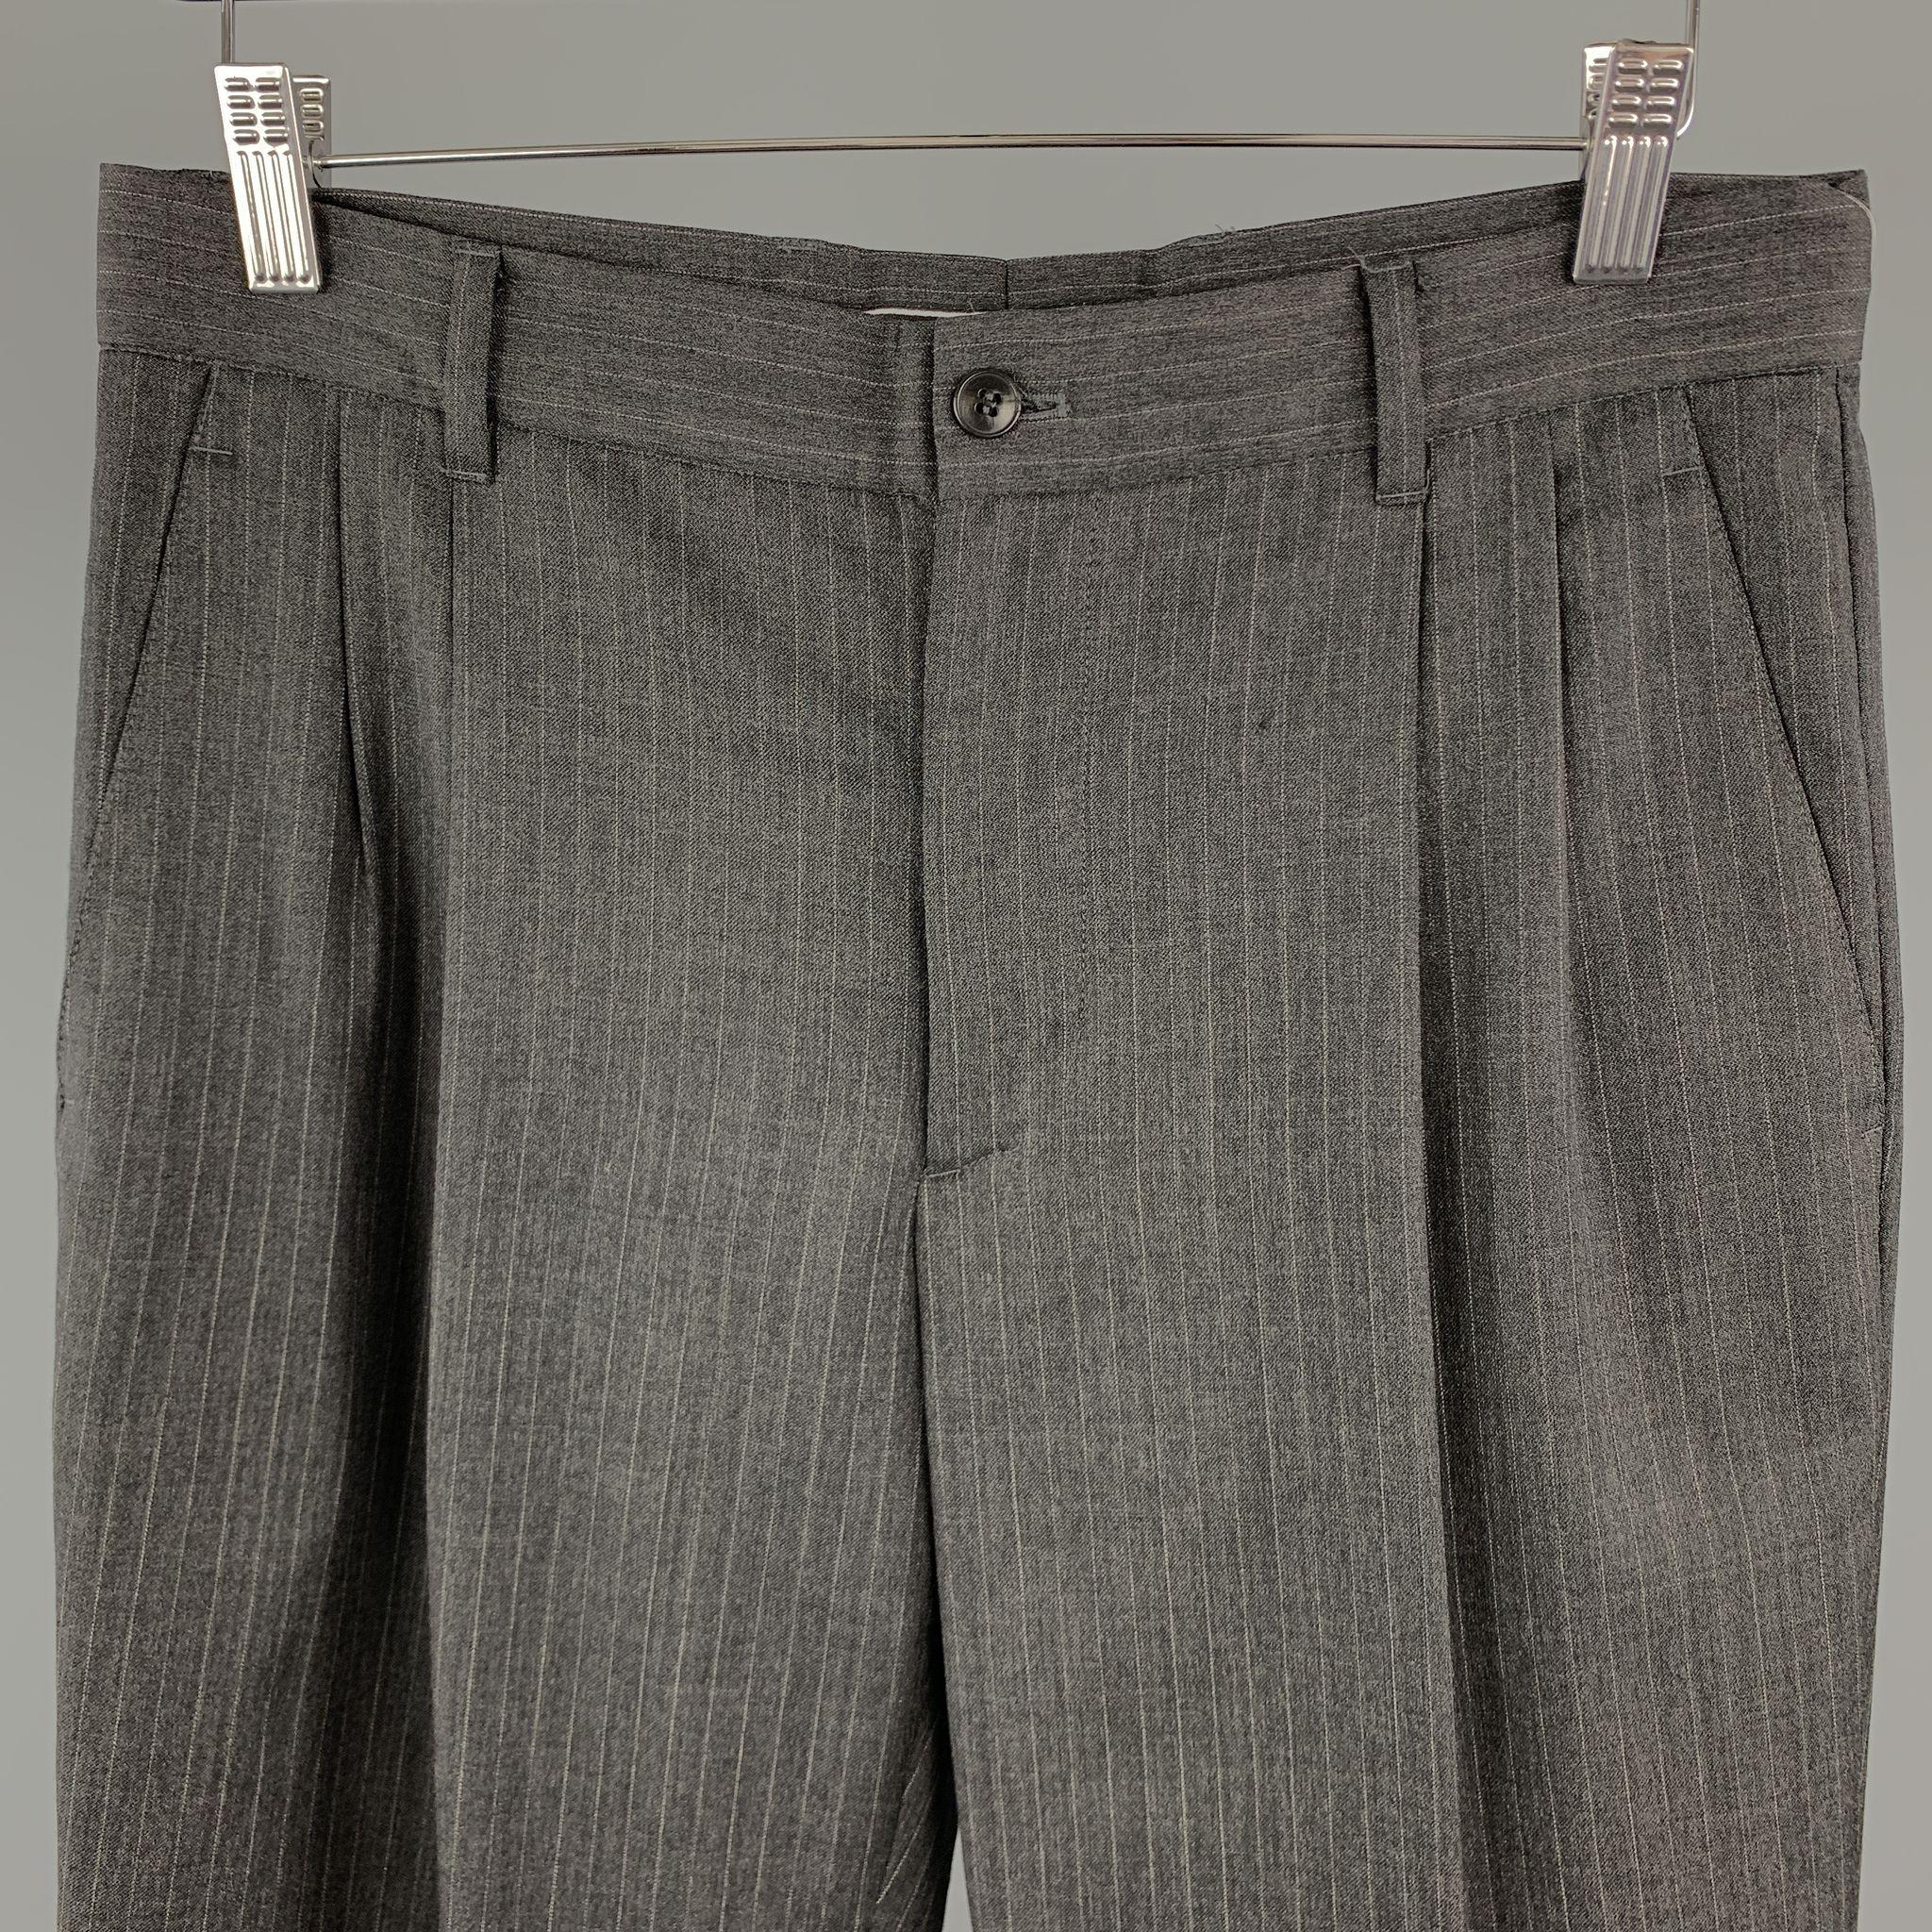 MIU MIU dress pants comes in a striped gray wool material, featuring a pleated front, zip fly, and seam and slit pockets. Made in Italy.

Excellent Pre-Owned Condition.
Marked: IT 46 

Measurements:

Waist: 32 in. 
Rise: 10 in. 
Inseam: 31 in.